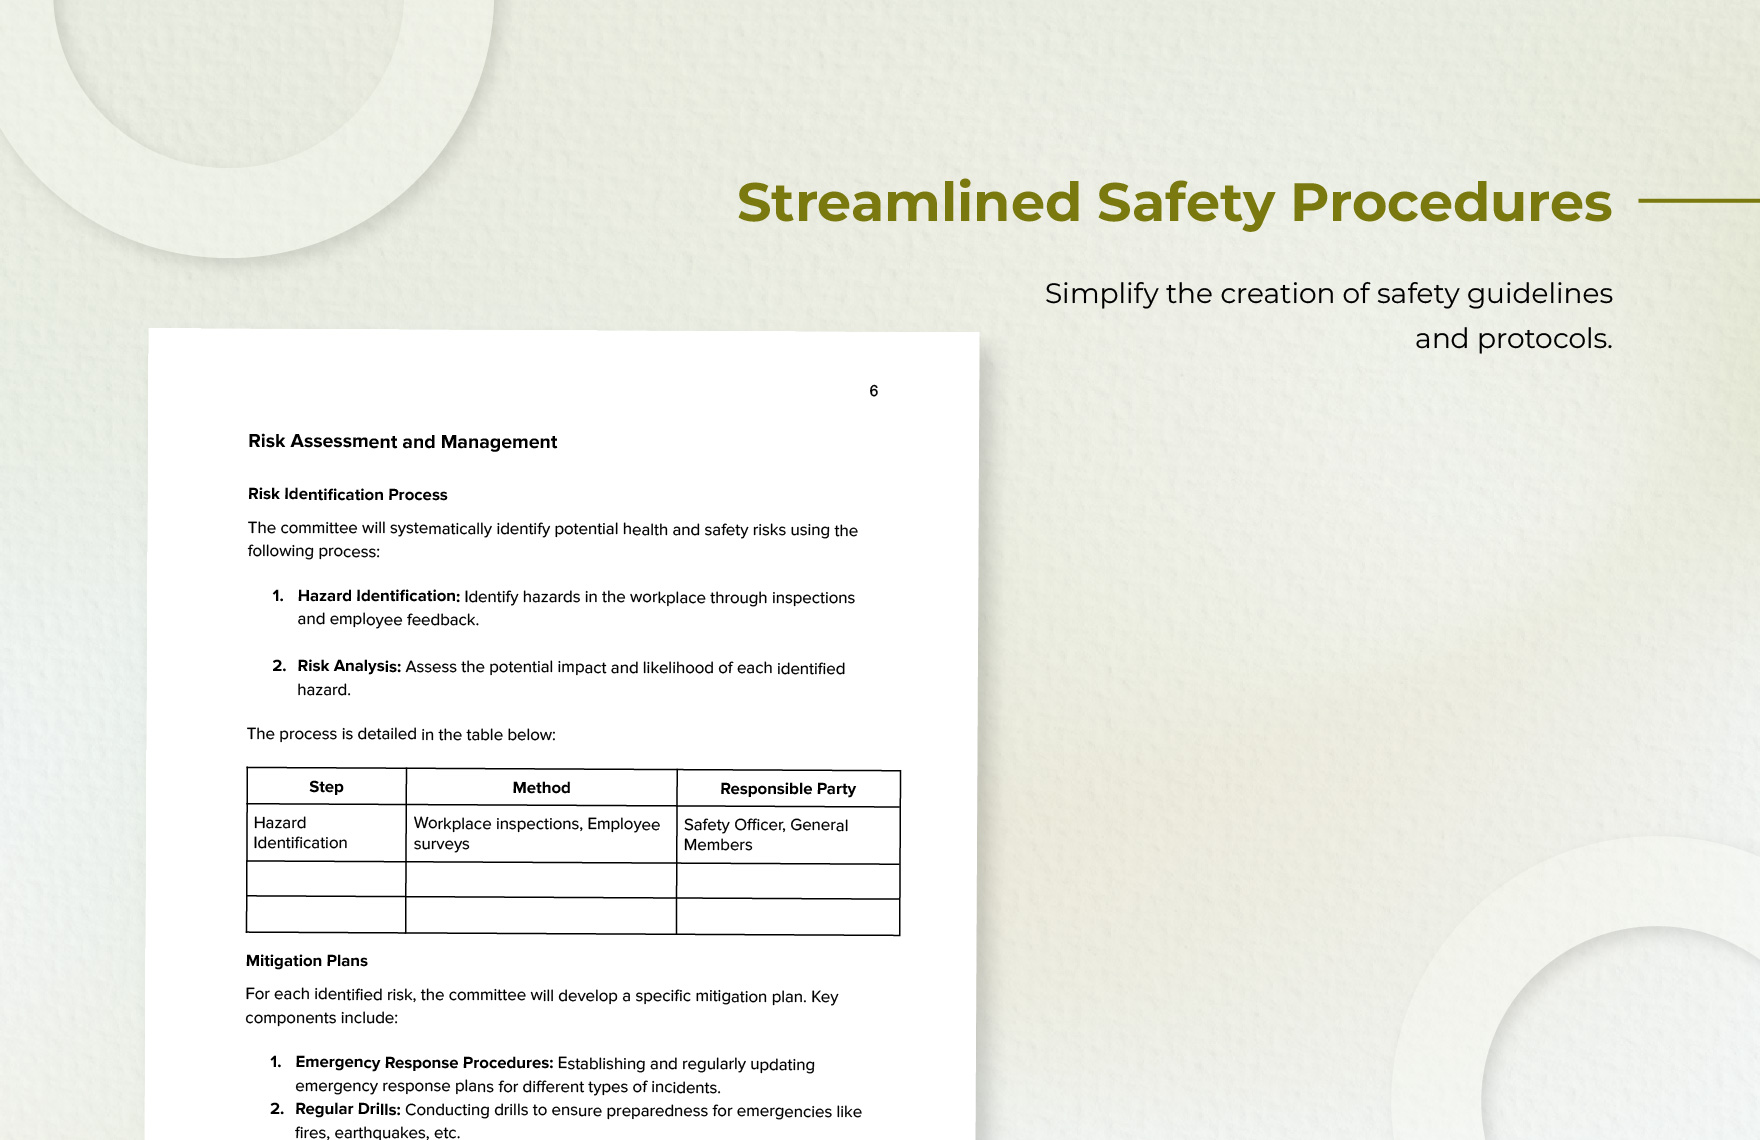 Health Safety Committee Proposal Template